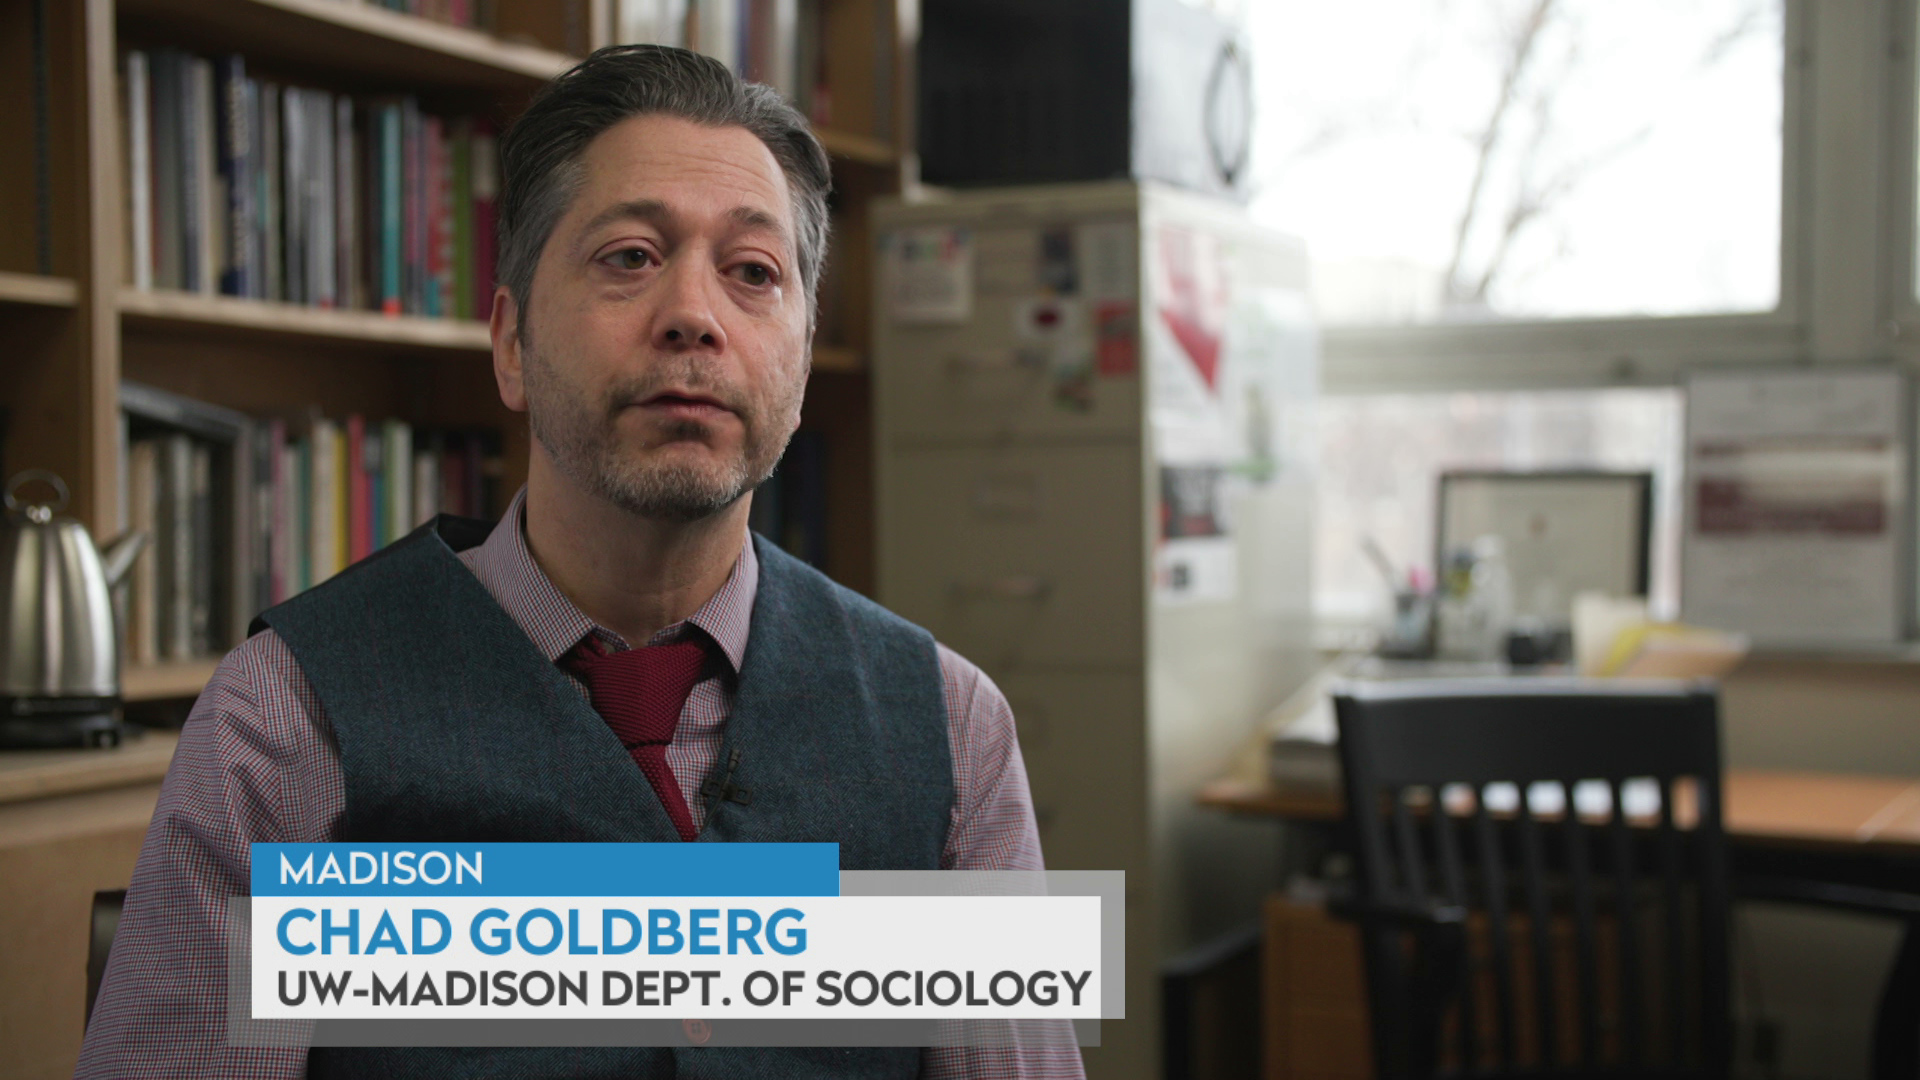 Chad Goldberg sits in an office with bookshelves, a file cabinet, window, desk and chair in the background, with a graphic at bottom reading "Madison," "Chad Goldberg," and "UW-Madison Dept. of Sociology."